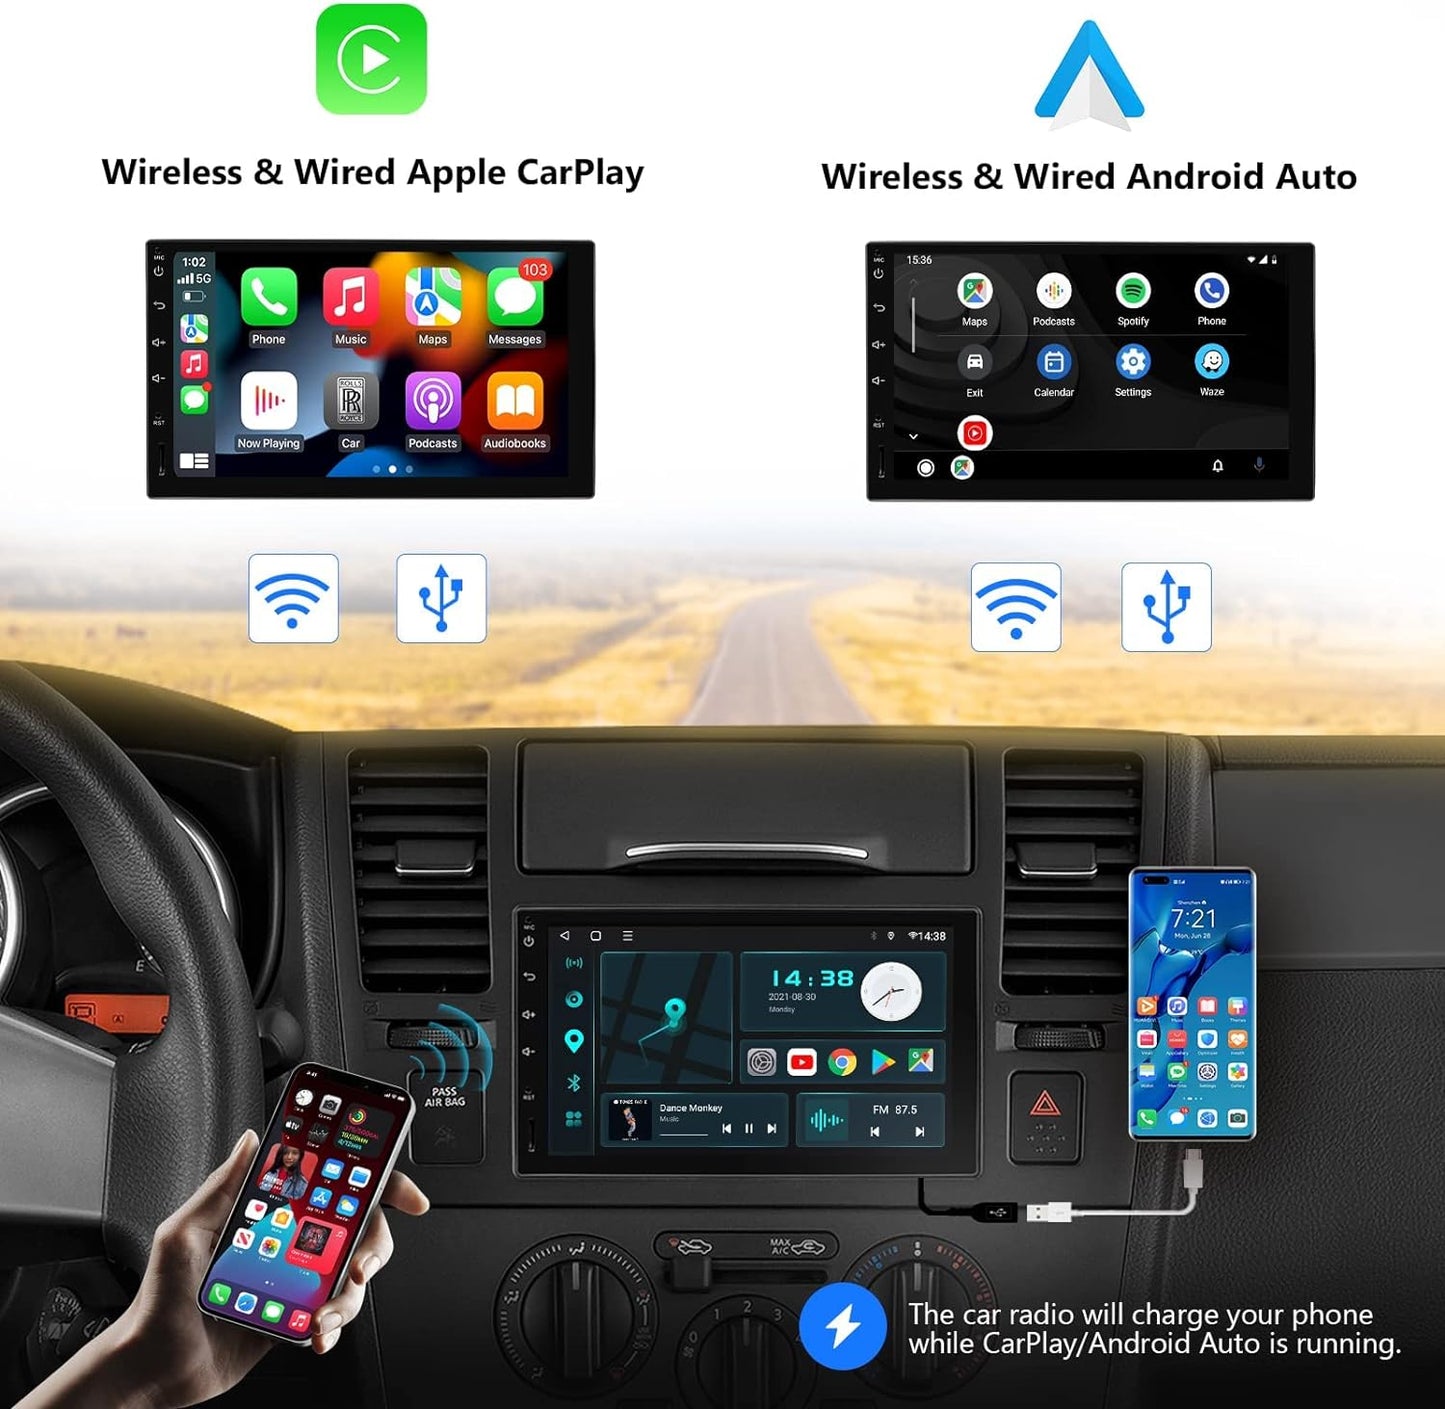 Eonon 7 inch Android 10 Car Stereo CarPlay Android Auto Headunit GPS Sat Nav Bluetooth Support RearView Camera OBDII DAB+ Steering Wheel Controls Q04SE